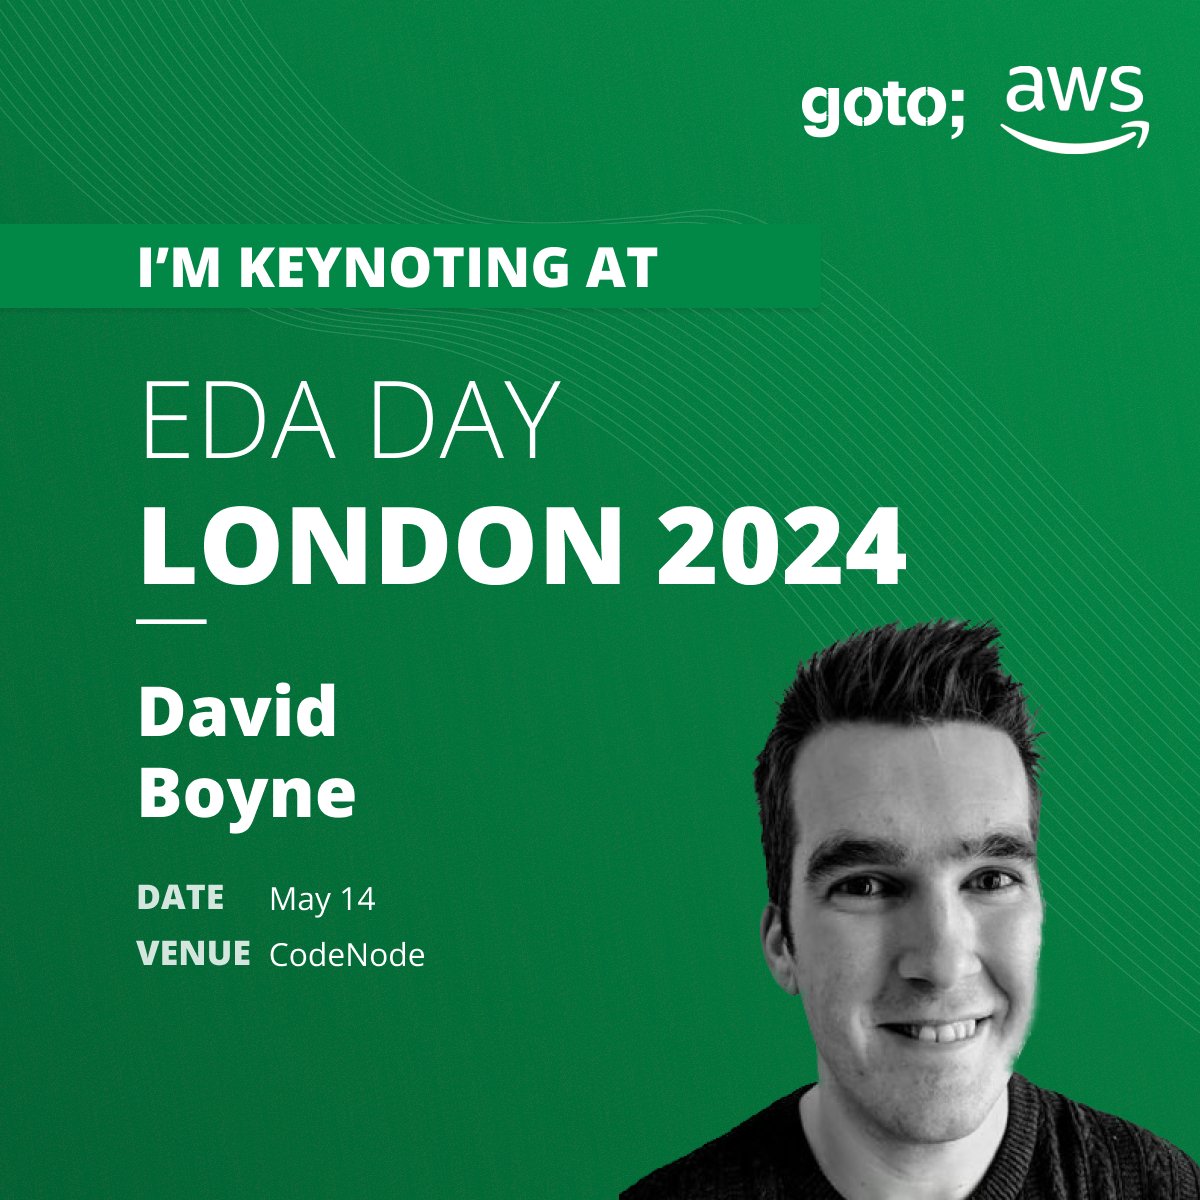 Super excited to share with you all I'm going to be keynoting this years EDA day in London❤️ Going to be fun! If you are interested in event-driven architectures and want a full day conference around it then this may be for you 🙏 (link below) 👇